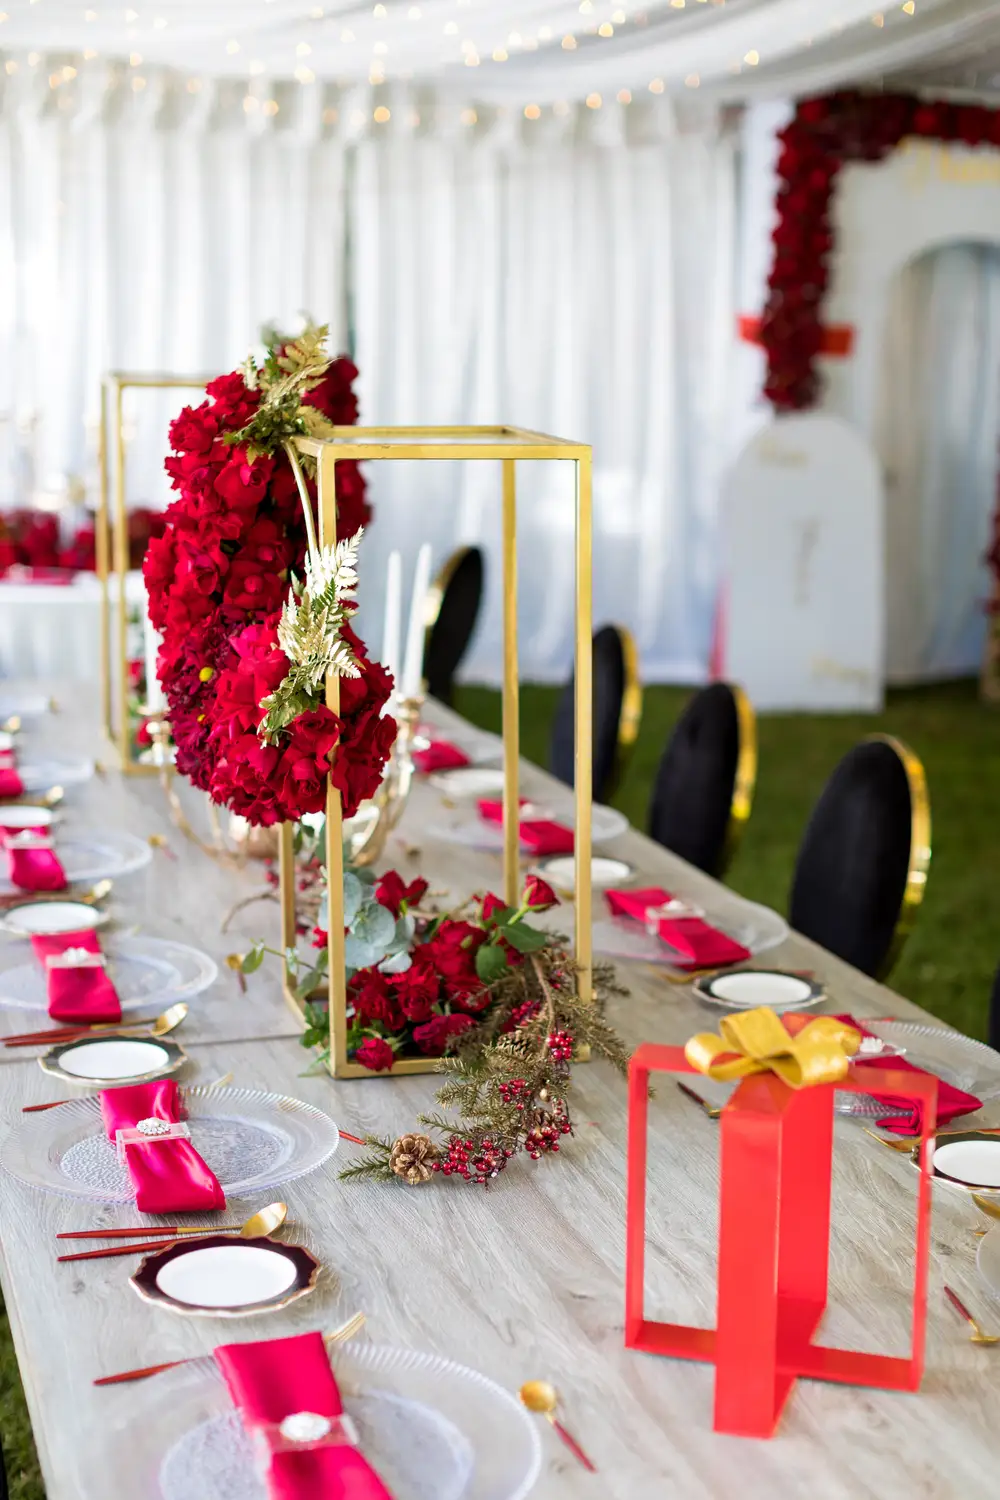 Dinning table at an event decorated with flowers